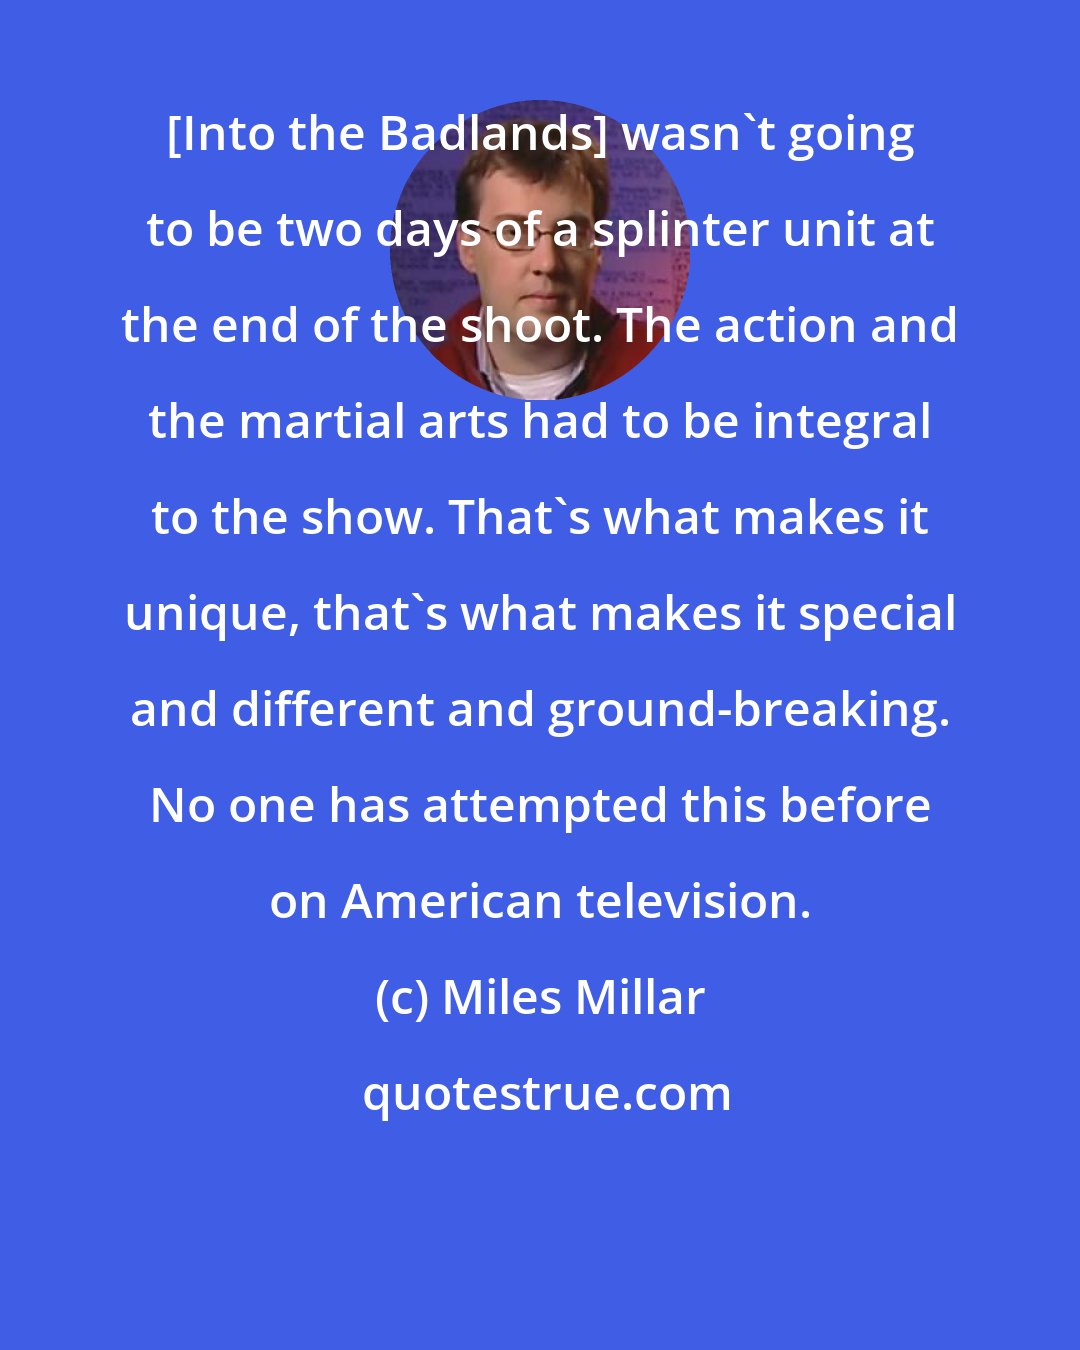 Miles Millar: [Into the Badlands] wasn't going to be two days of a splinter unit at the end of the shoot. The action and the martial arts had to be integral to the show. That's what makes it unique, that's what makes it special and different and ground-breaking. No one has attempted this before on American television.